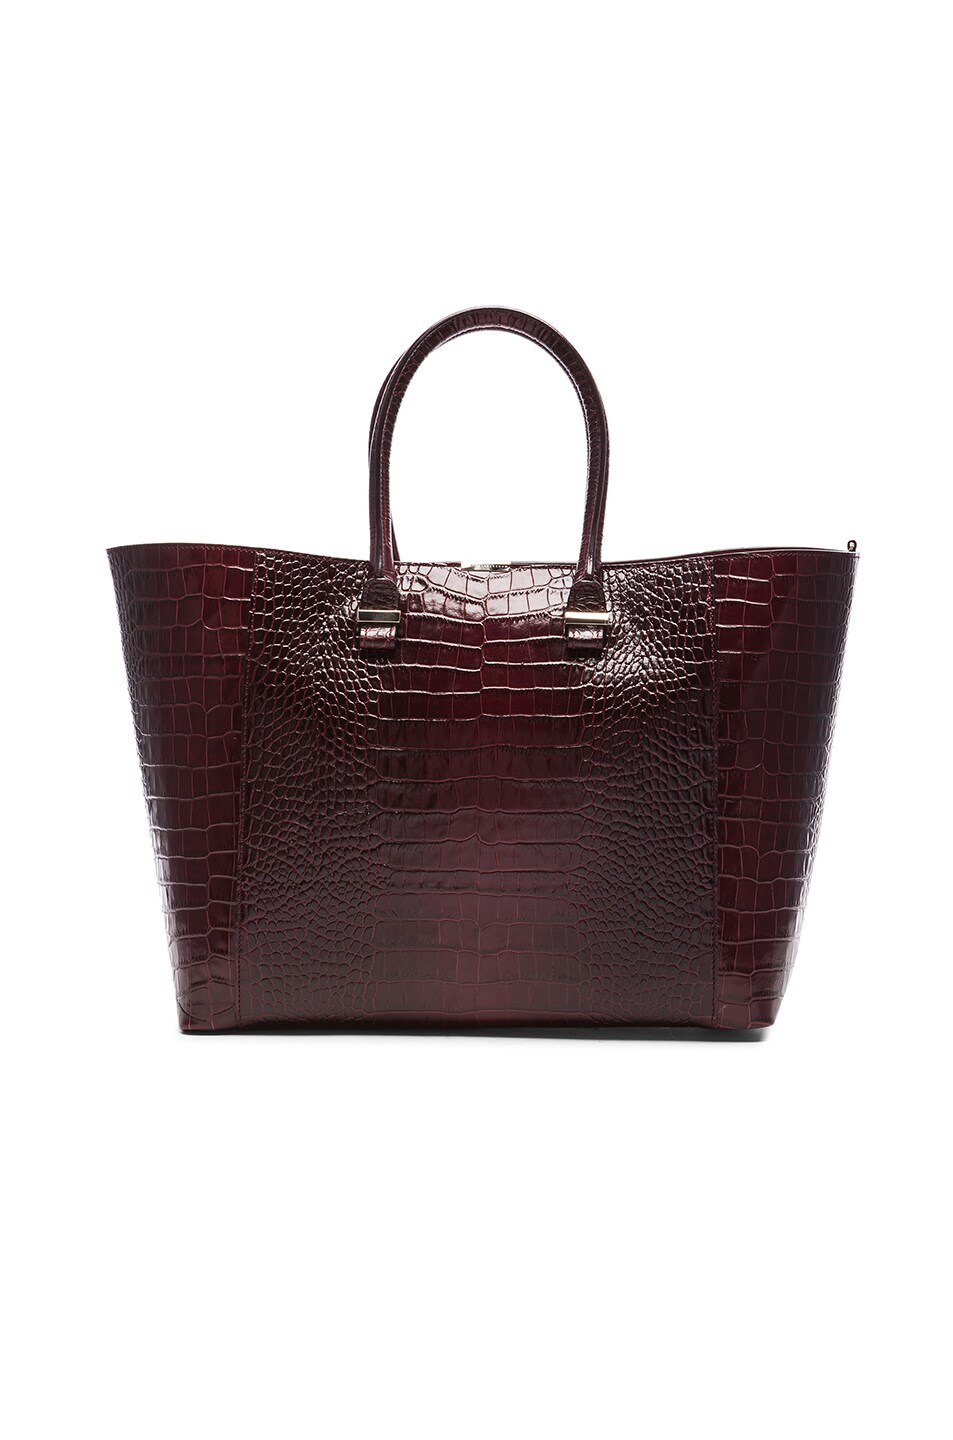 Image 1 of Victoria Beckham Printed Crocodile Liberty Tote in Bordeaux